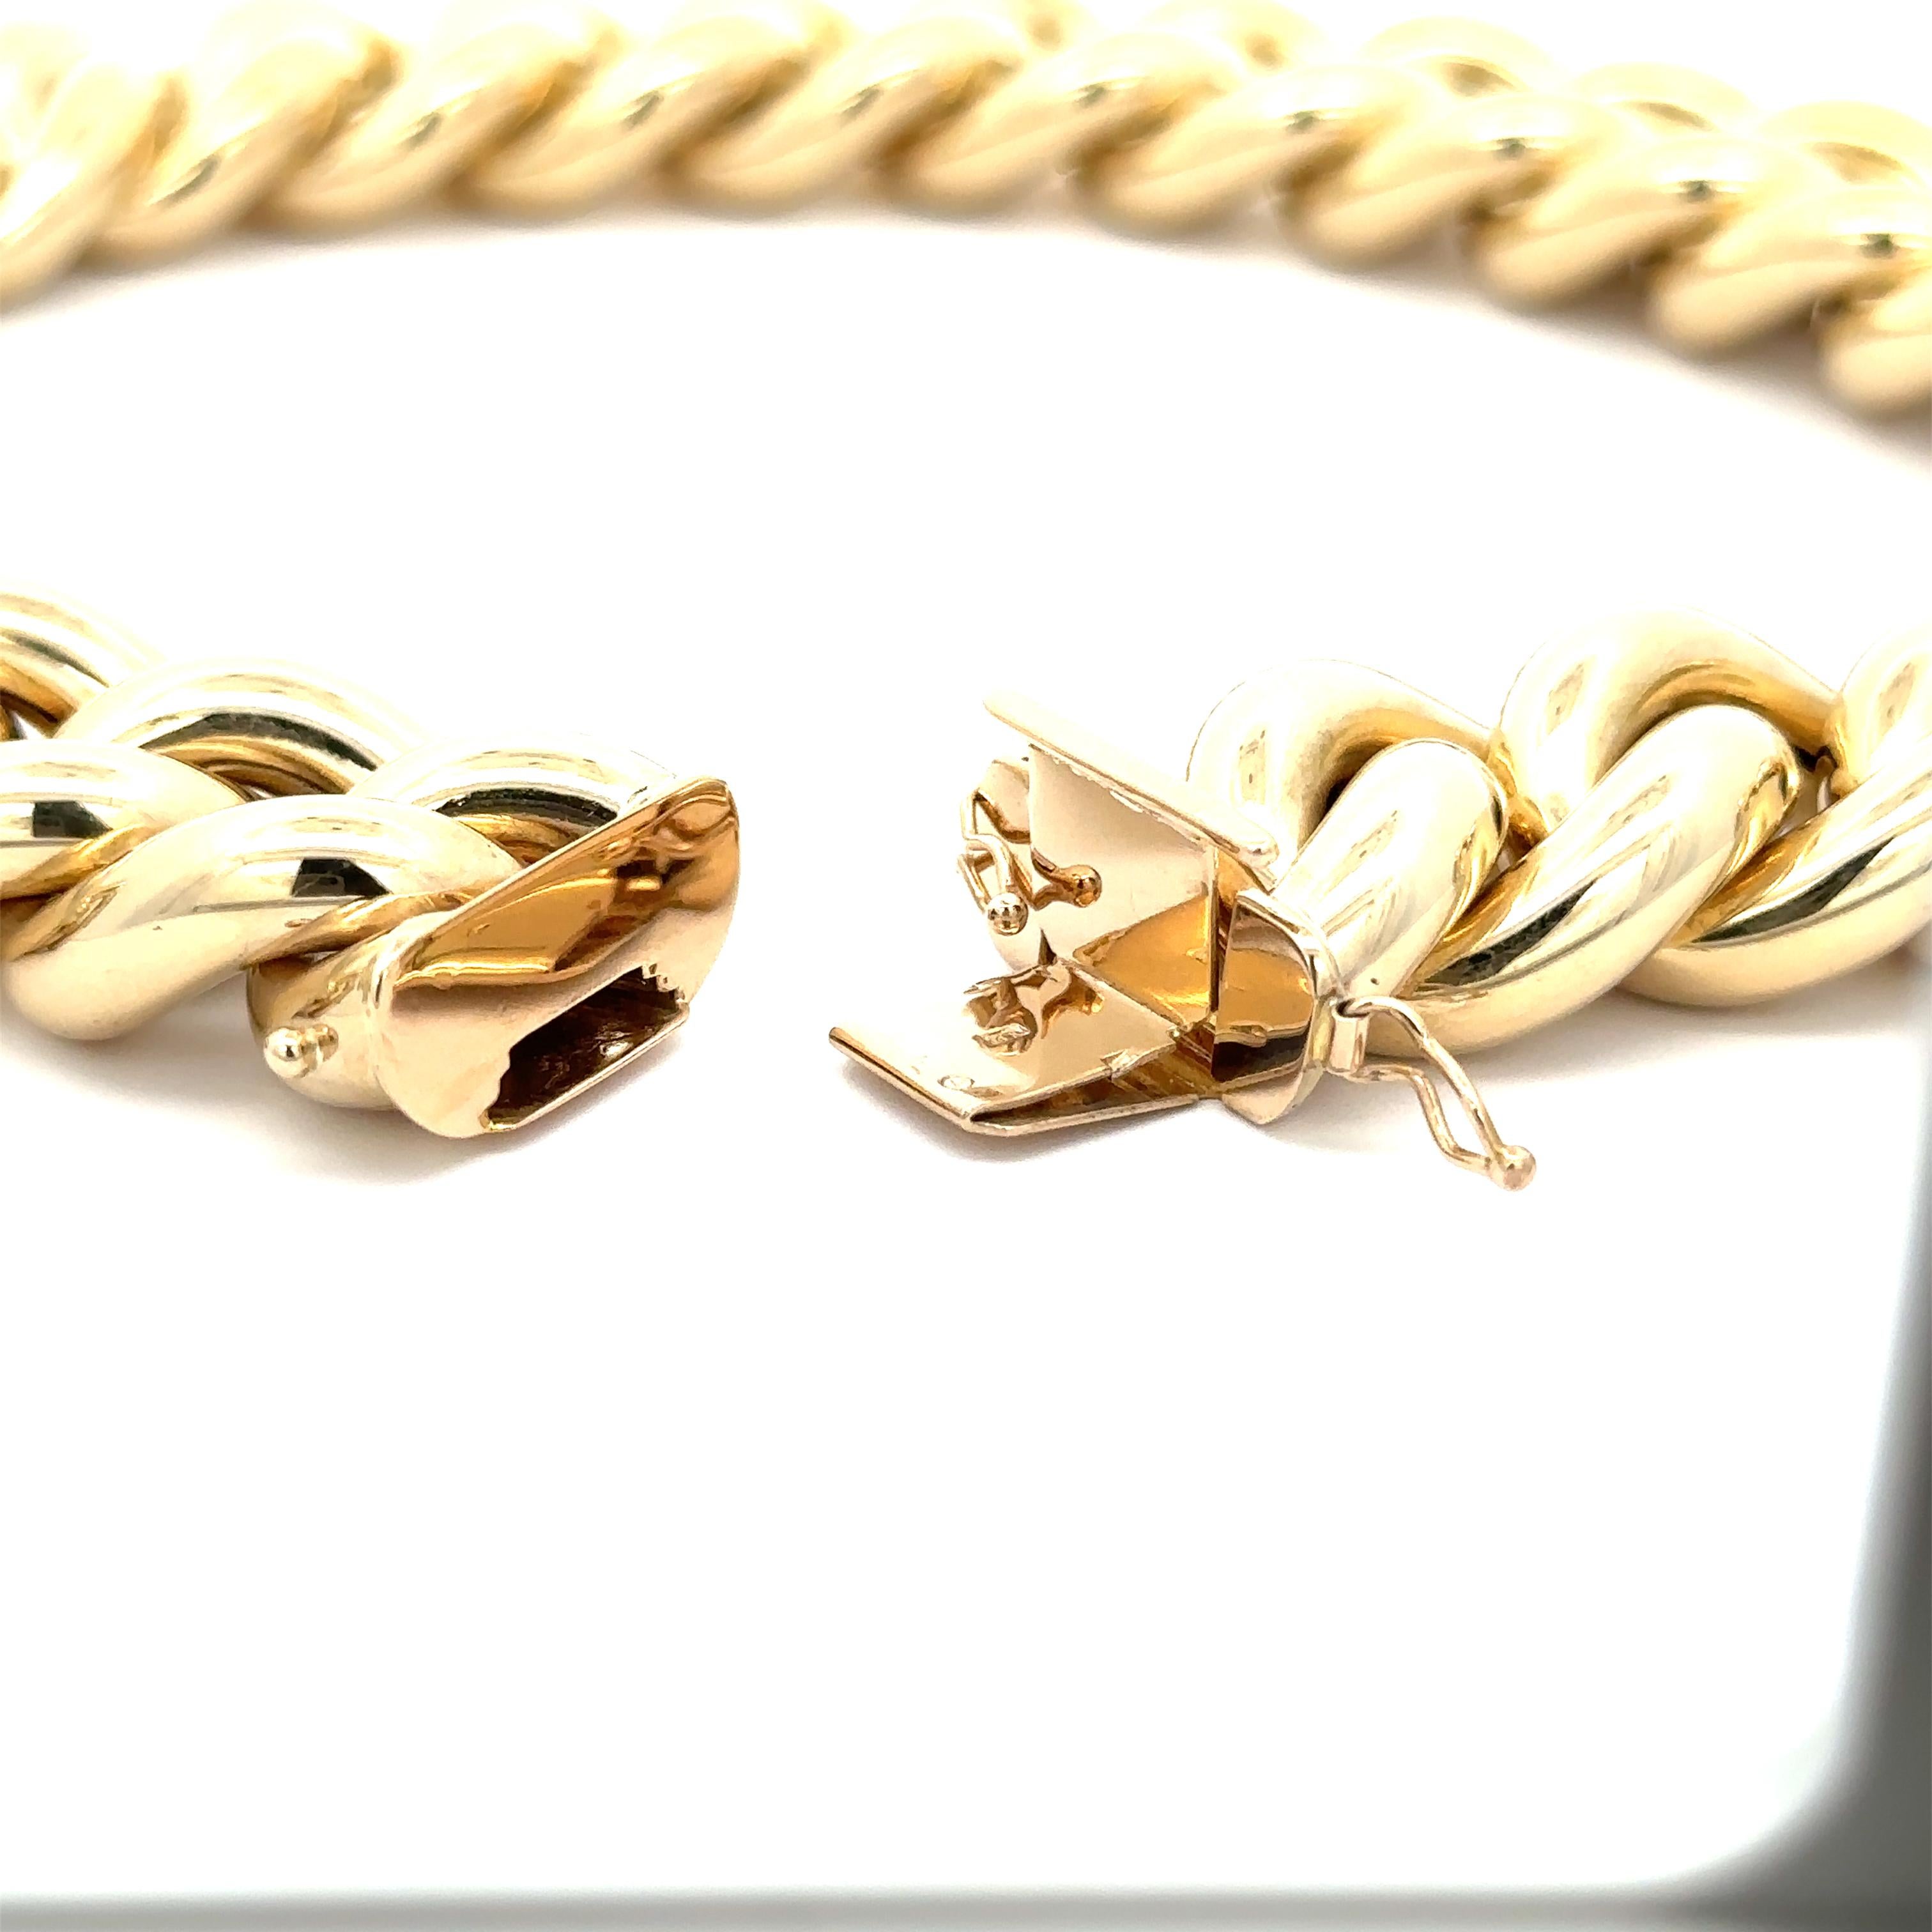 MAGNIFICENT PRESENCE and look on the neck! Italian gold at its finest! Simple yet extremely elegant! Enjoy!

Material: 14K Solid Yellow Gold 
Weight: 133.70 Grams
Chain Type: Polished Puffed Curb Cuban Link
Chain Length:	17 inches in wearable